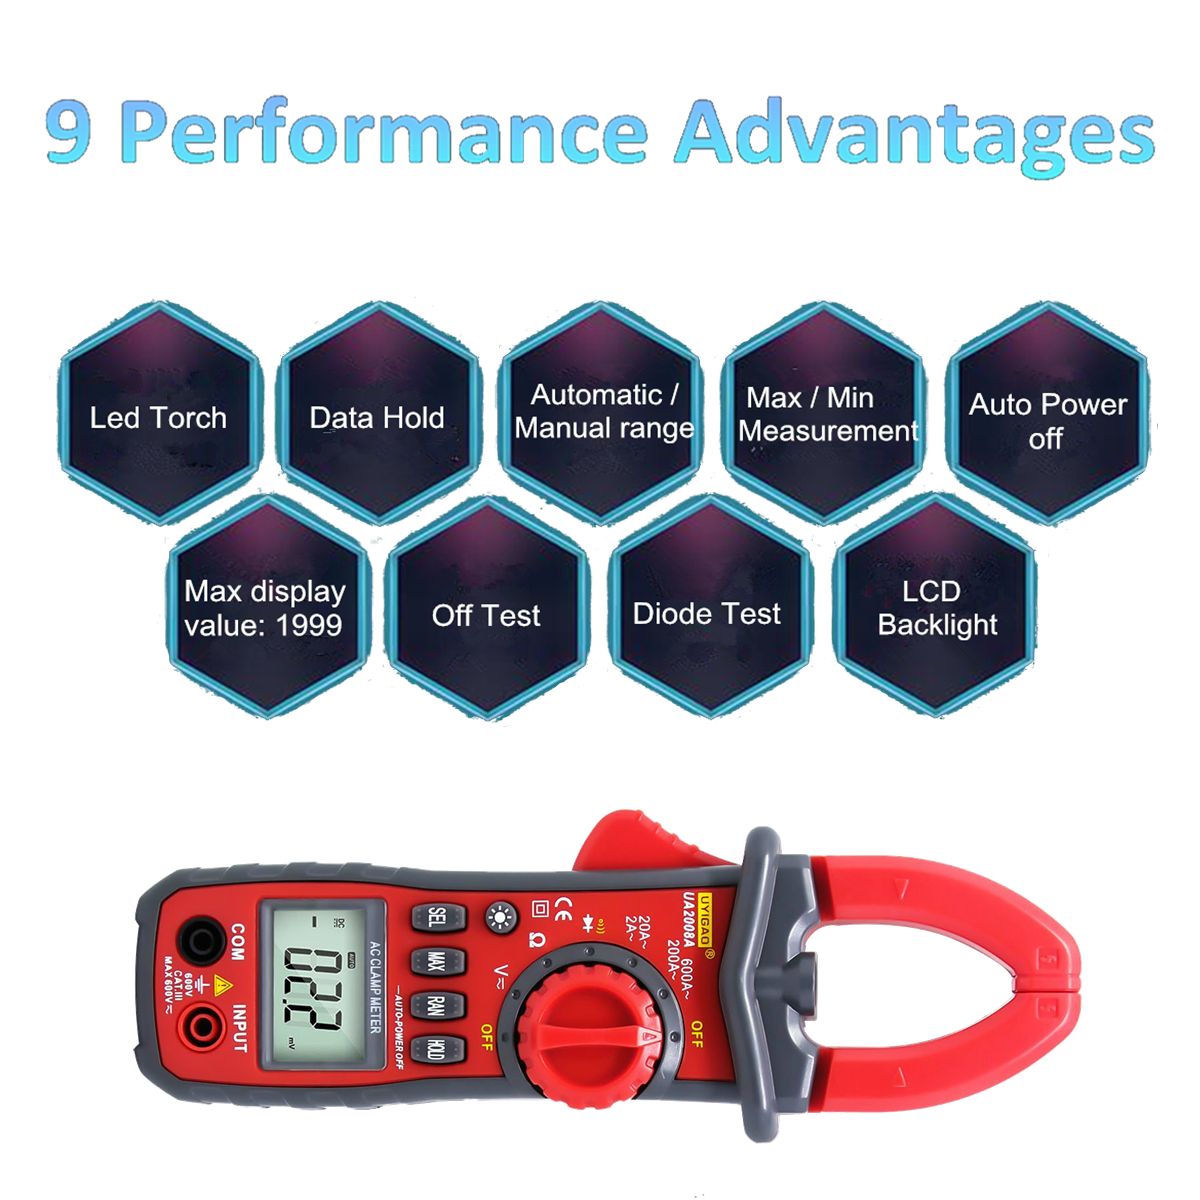 UA2008A-Handheld-Dual-Open-Digital-Clamp-Multimeter-ACDC-Voltage-Test-Probes-1244368